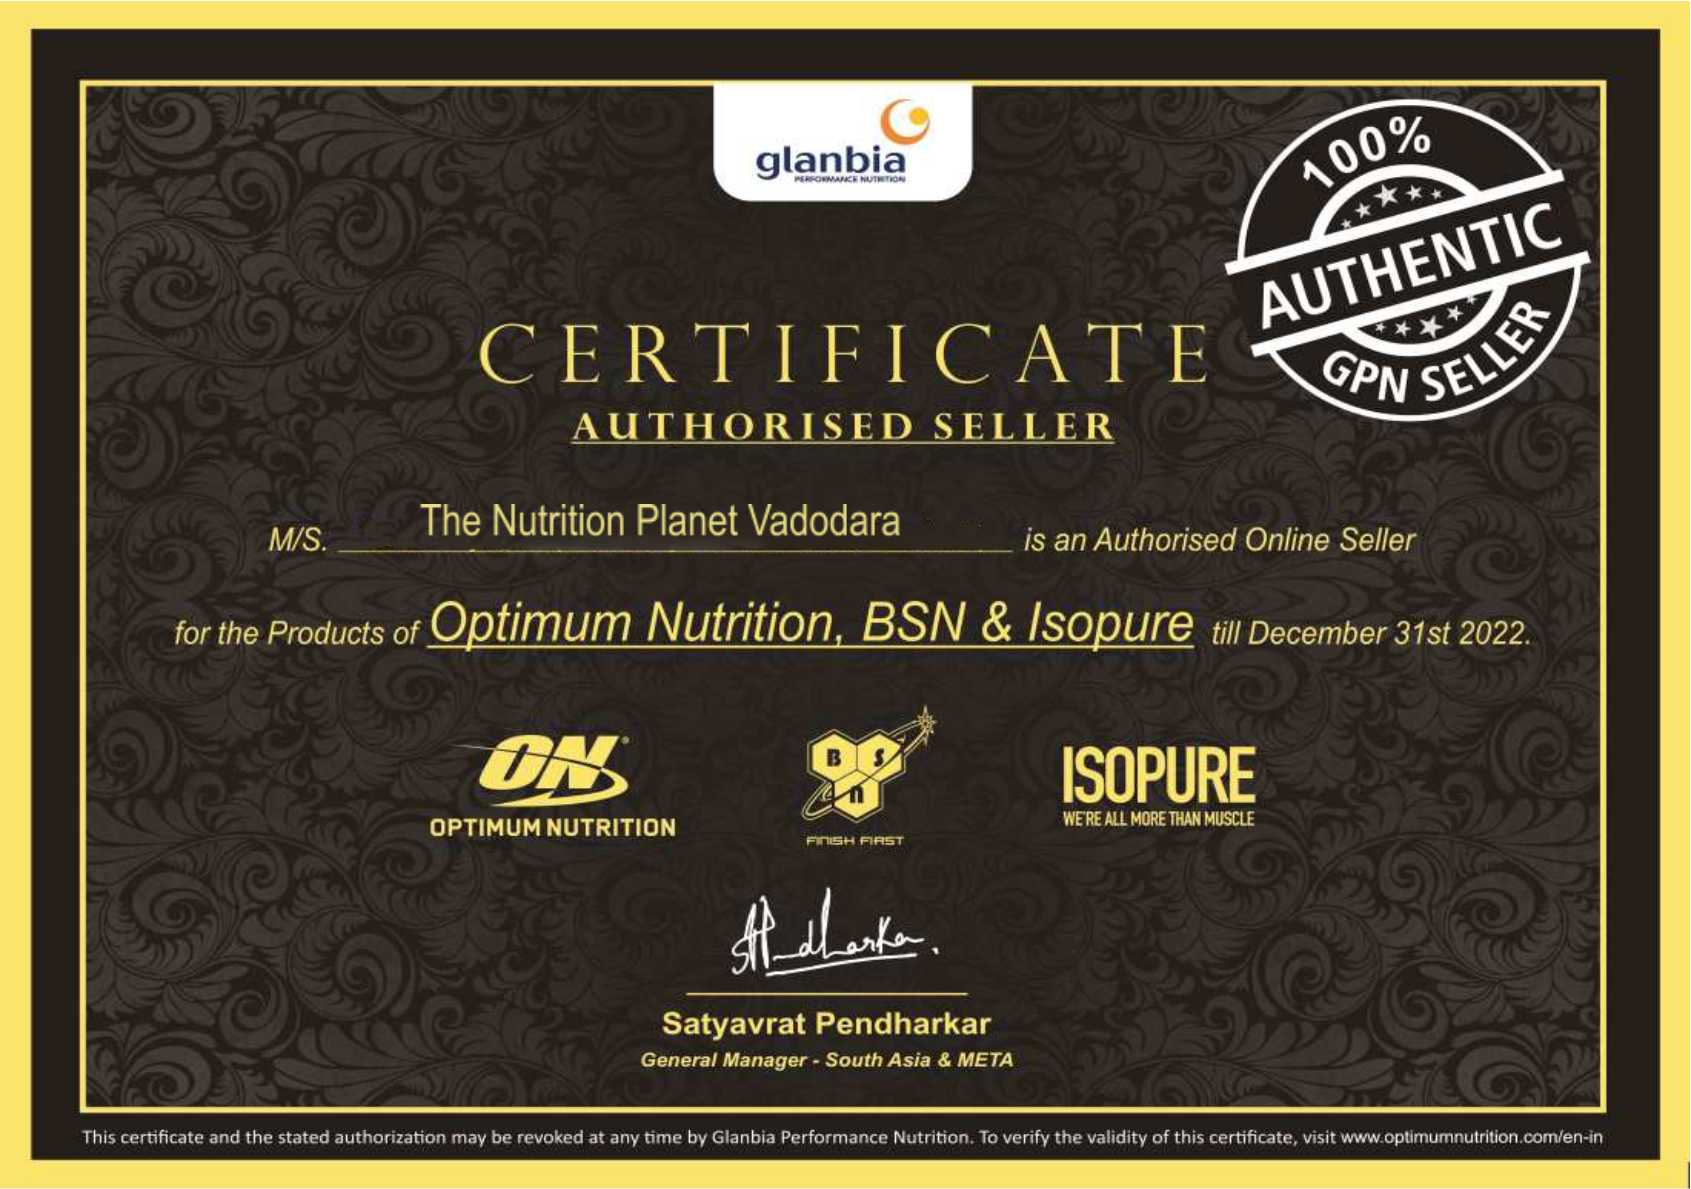 Authorised Seller Certificate From Glanbia